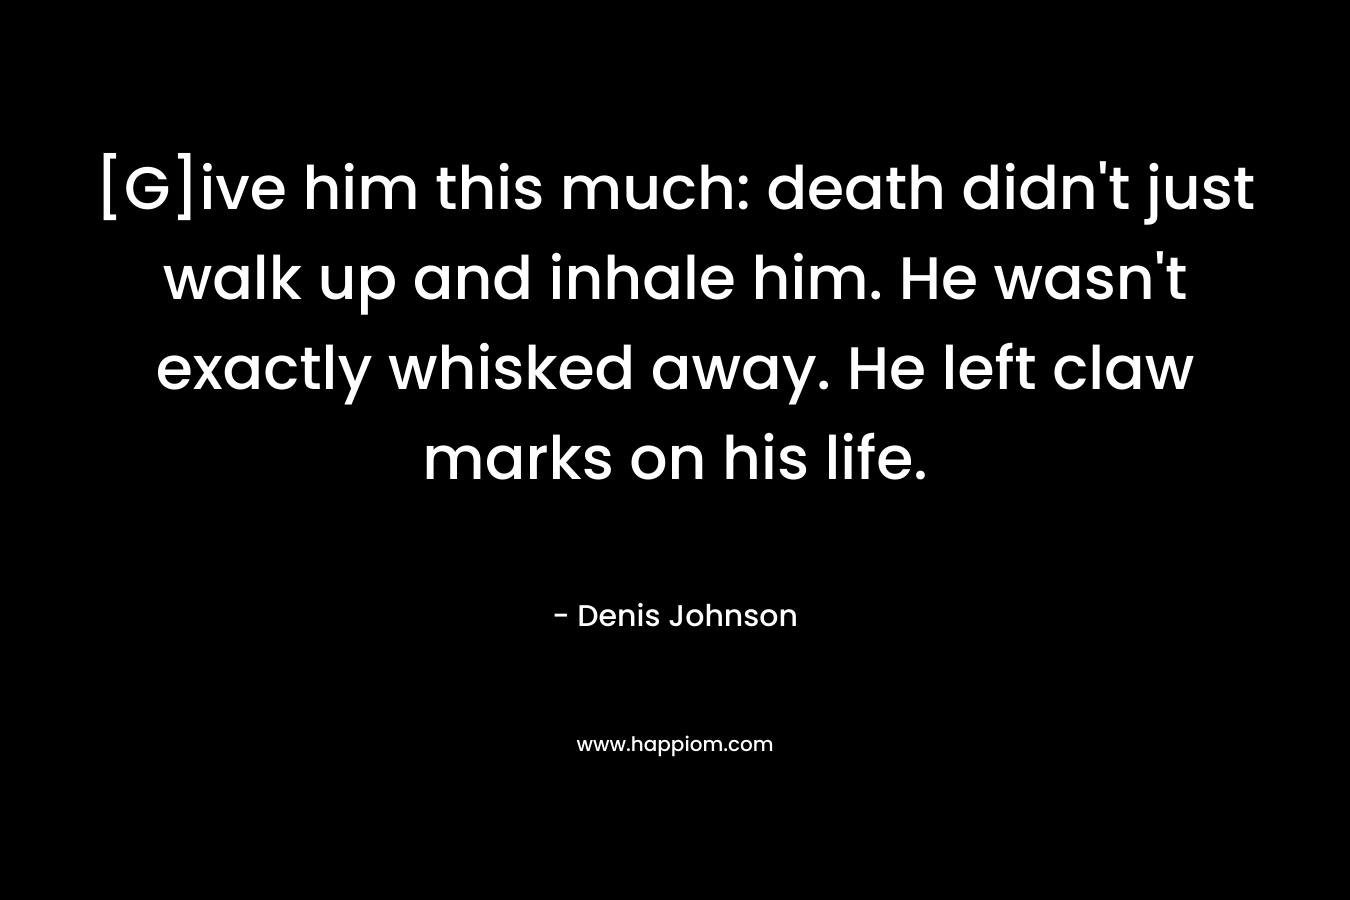 [G]ive him this much: death didn’t just walk up and inhale him. He wasn’t exactly whisked away. He left claw marks on his life. – Denis Johnson